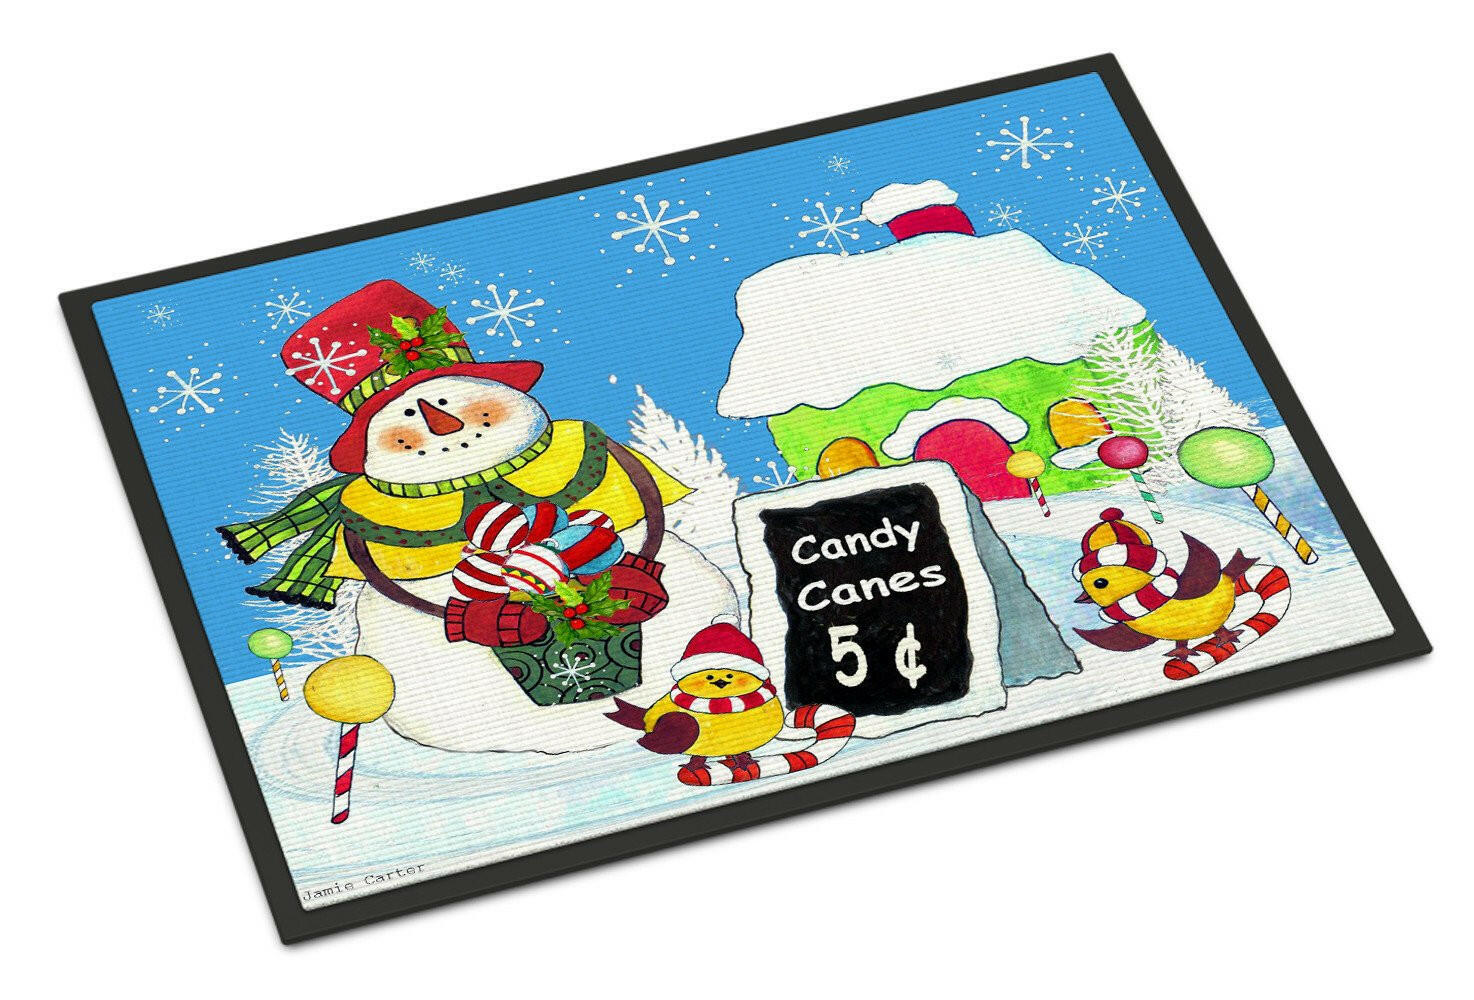 Candy Canes for Sale Snowman Indoor or Outdoor Mat 24x36 PJC1076JMAT - the-store.com